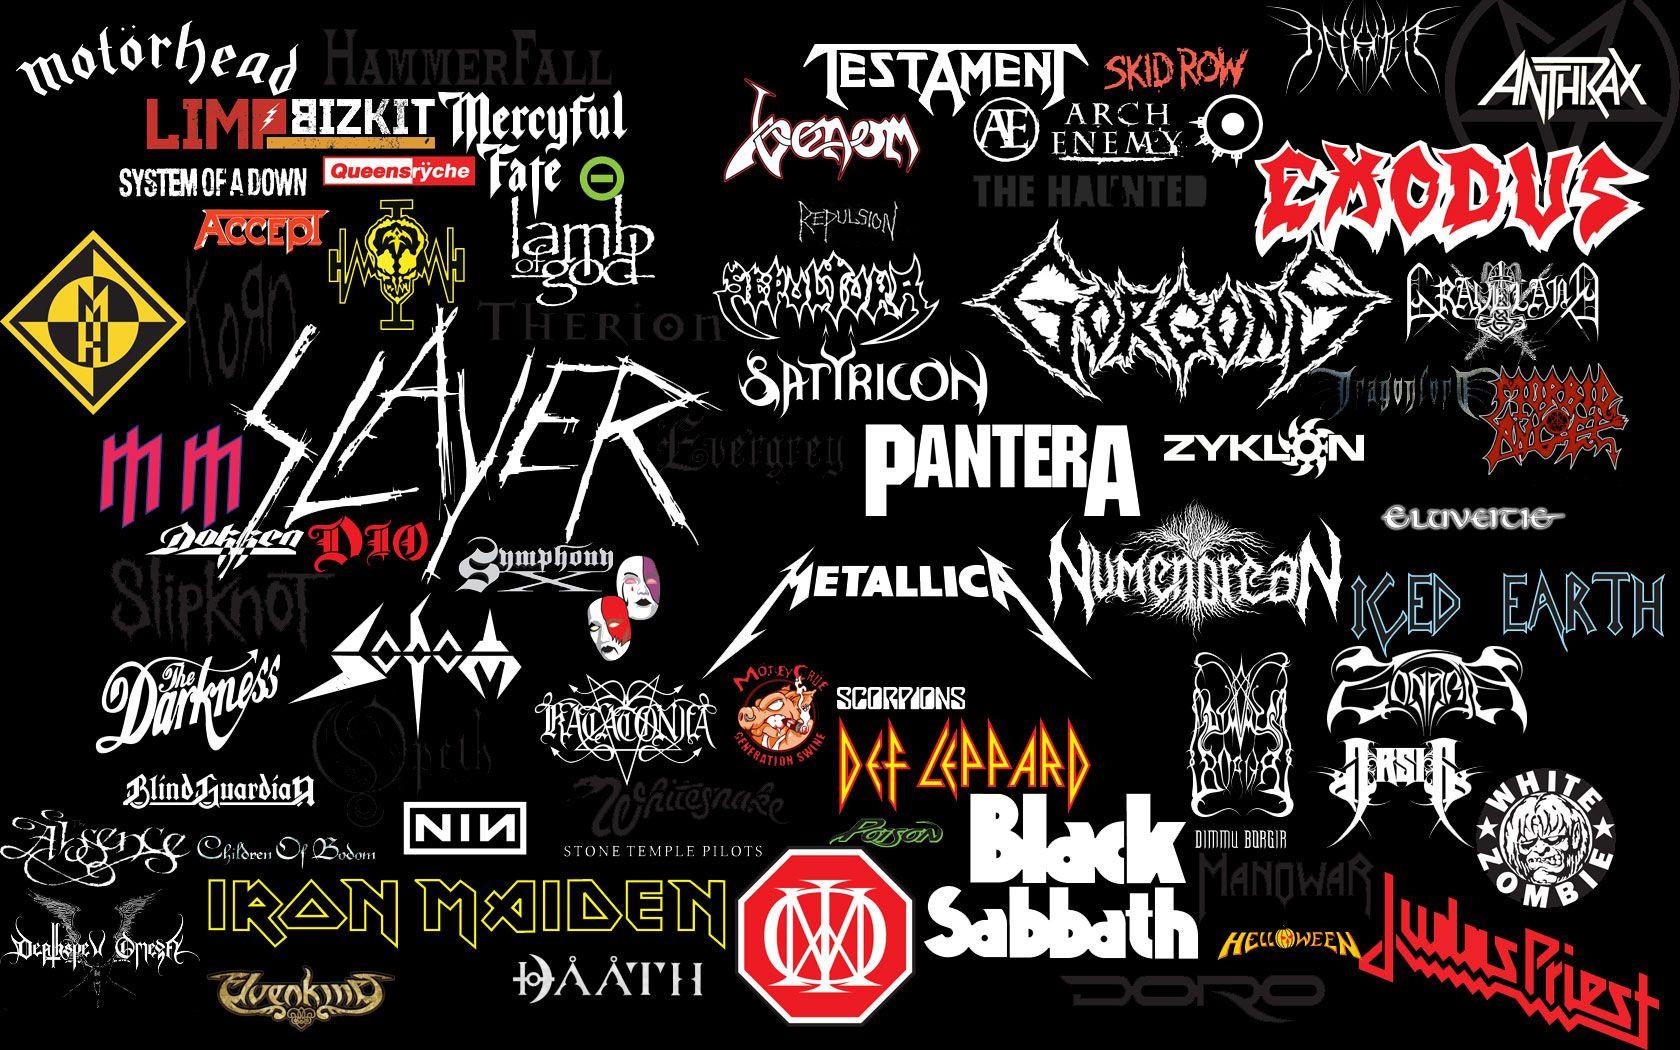 Heavy Metal Band Logo - Heavy Metal images Band Logos HD wallpaper and background photos ...